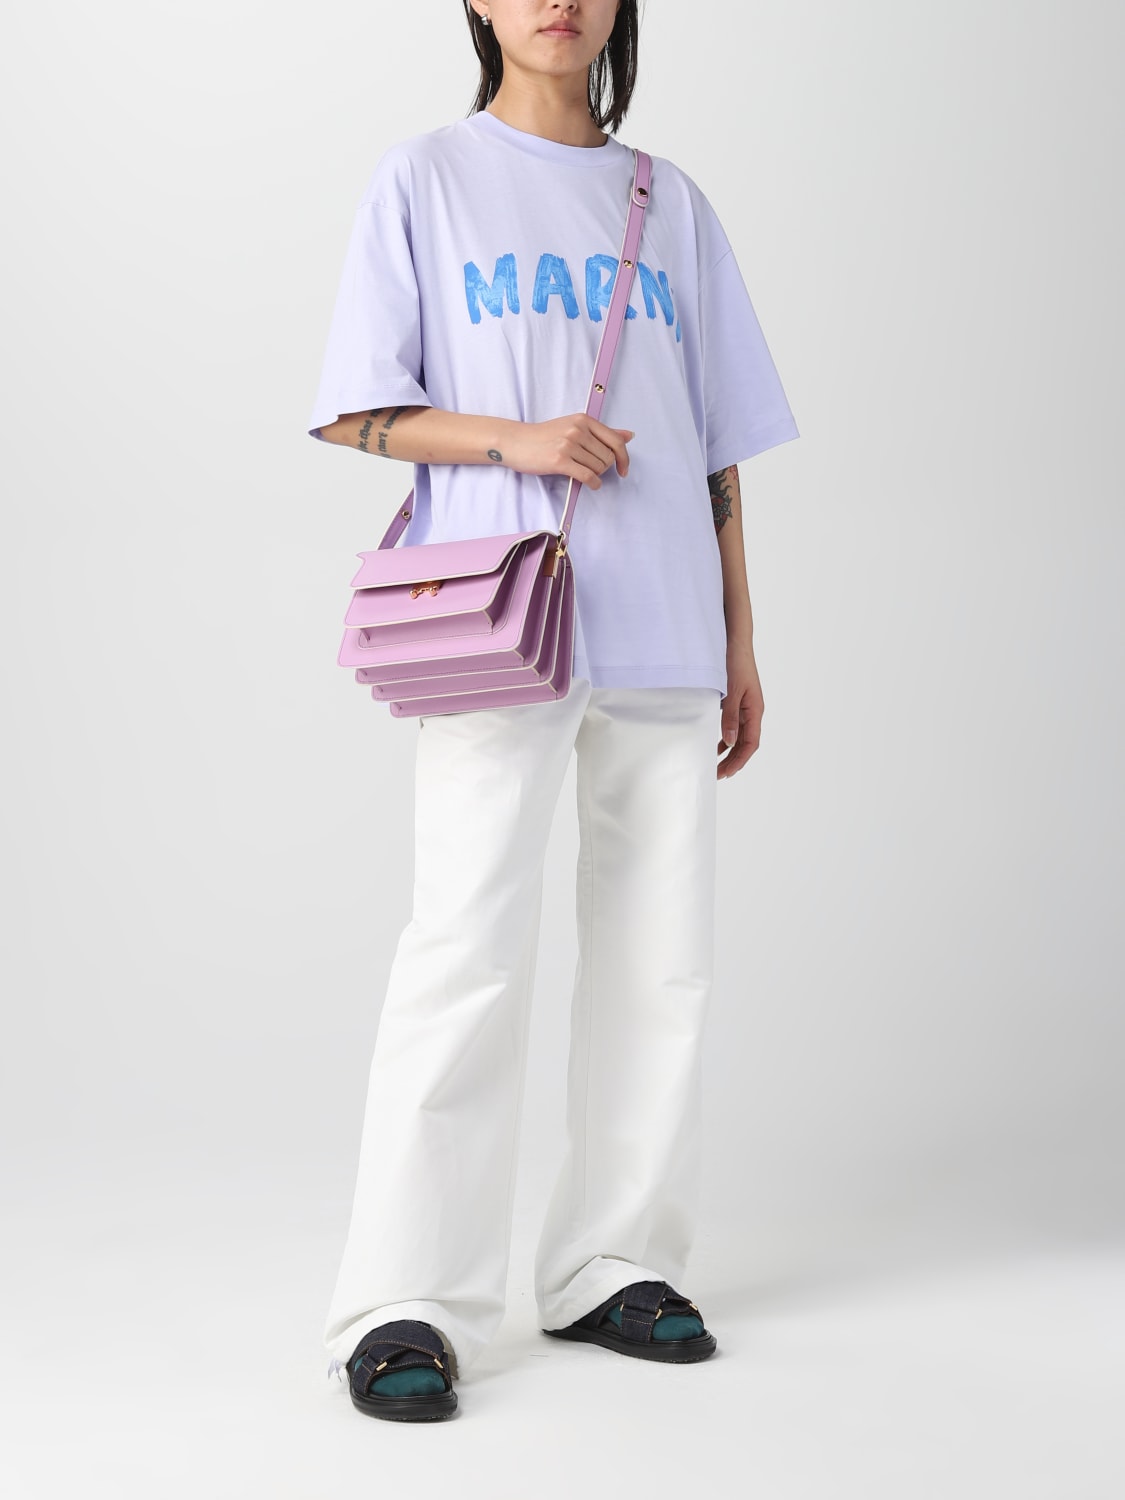 The Marni Trunk Bag  An everyday classic in a light lilac